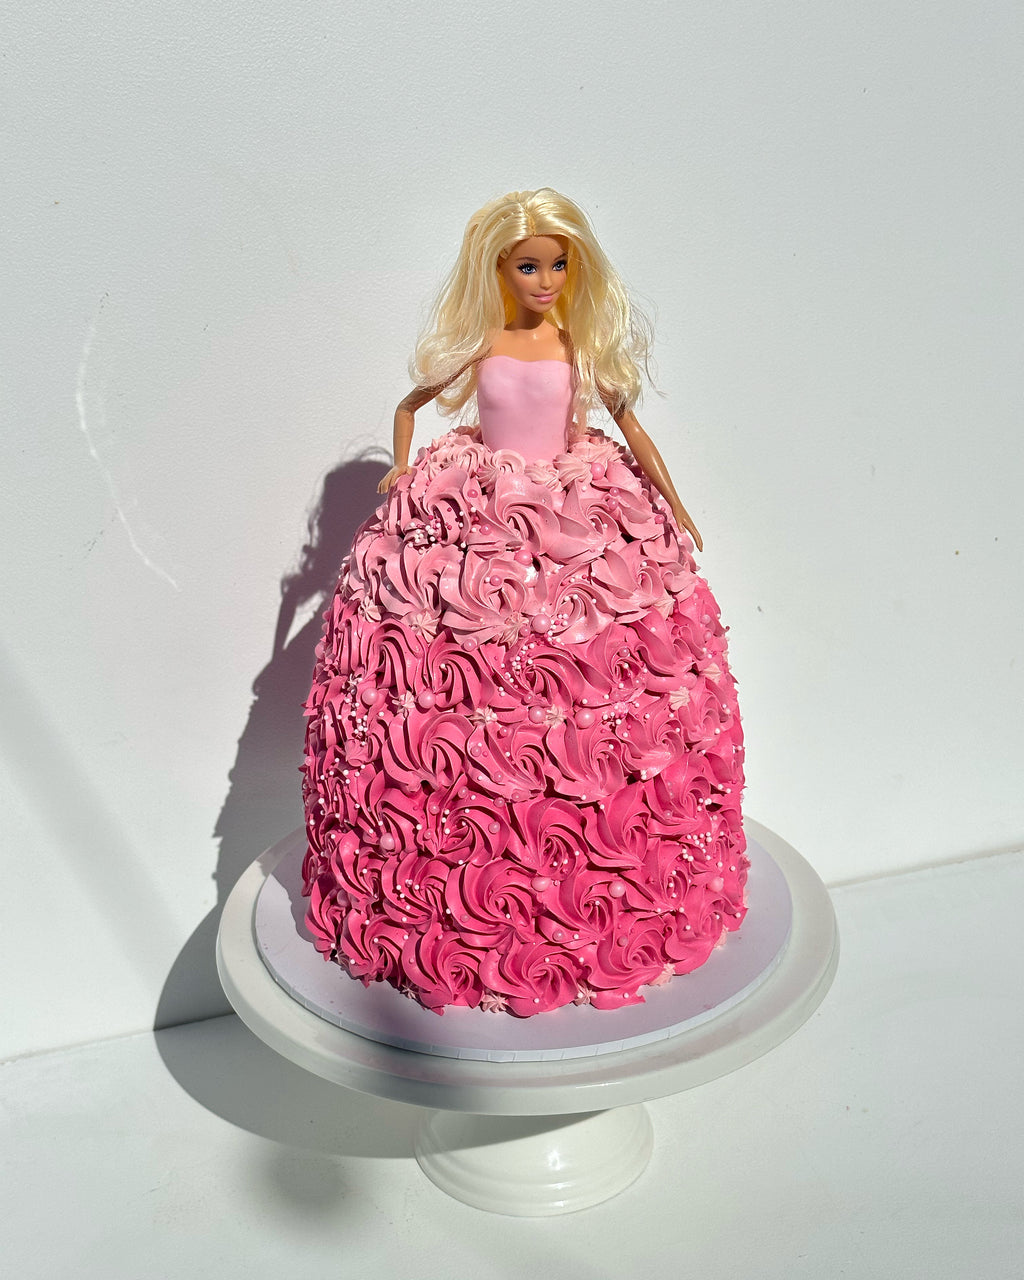 Buy Barbie Cake in Dubai | Perfect Treat for Your Princess